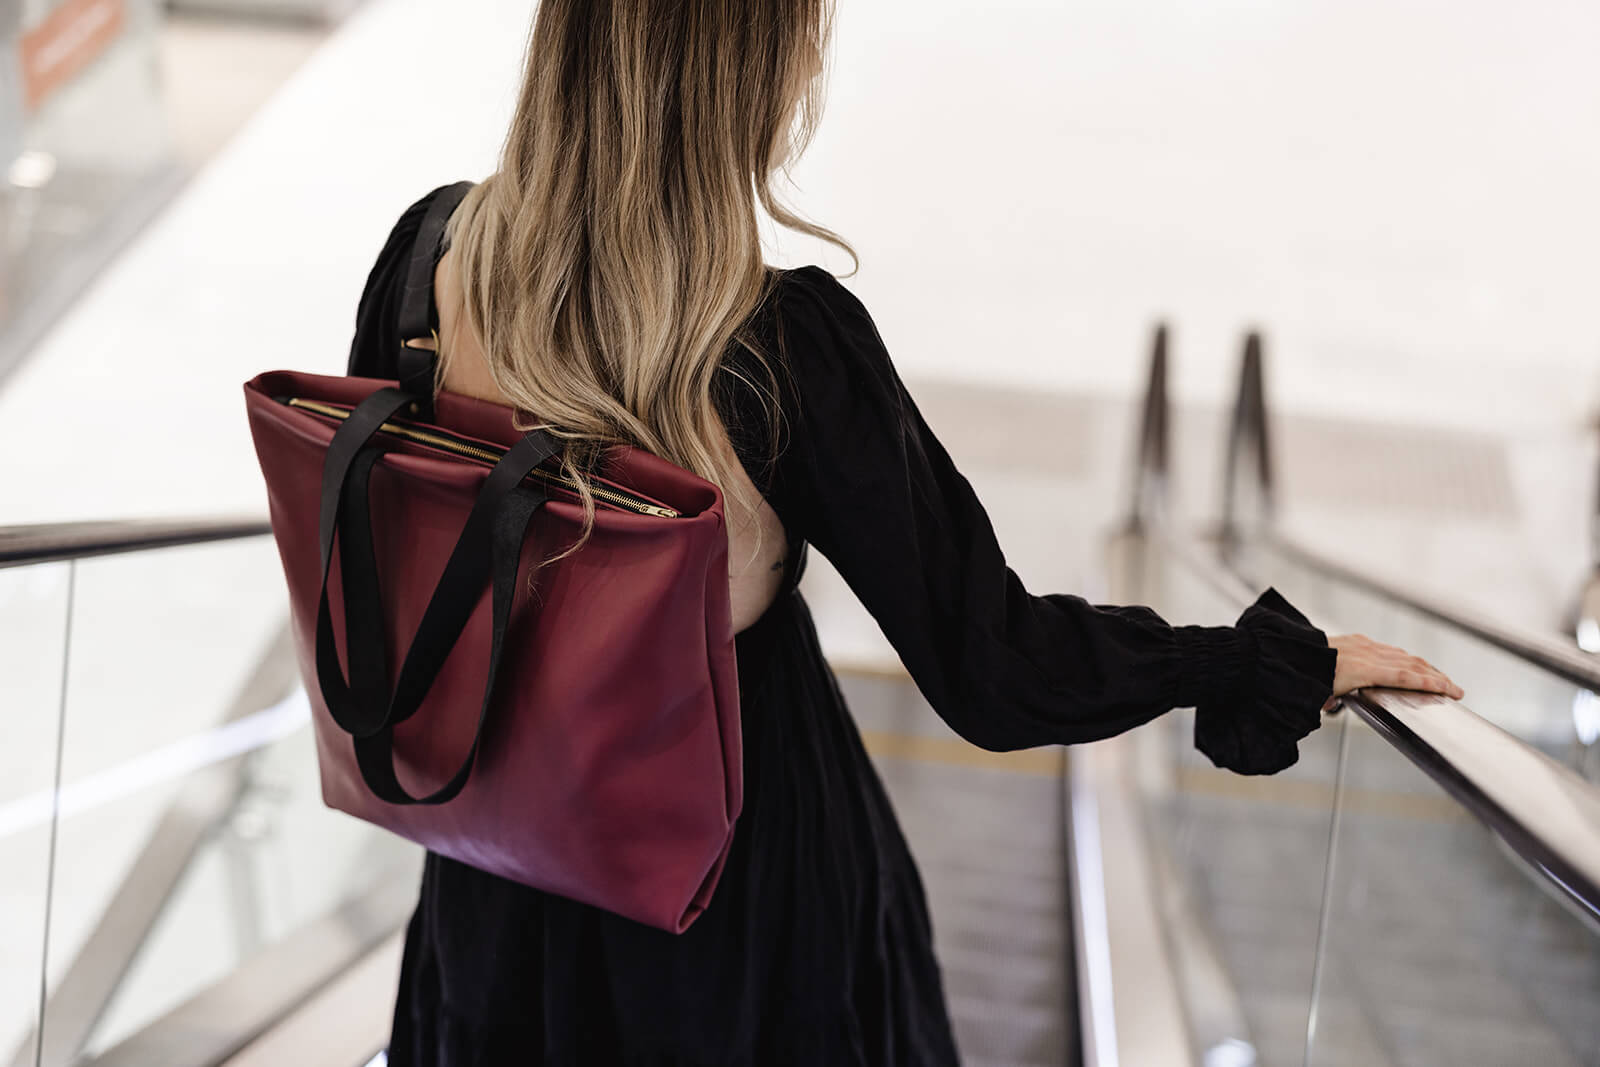 Woman in long black dress and cherry leather backpack riding down an escalator. The backpack is the Cherry Leather Backpack & Tote by Ella Jackson